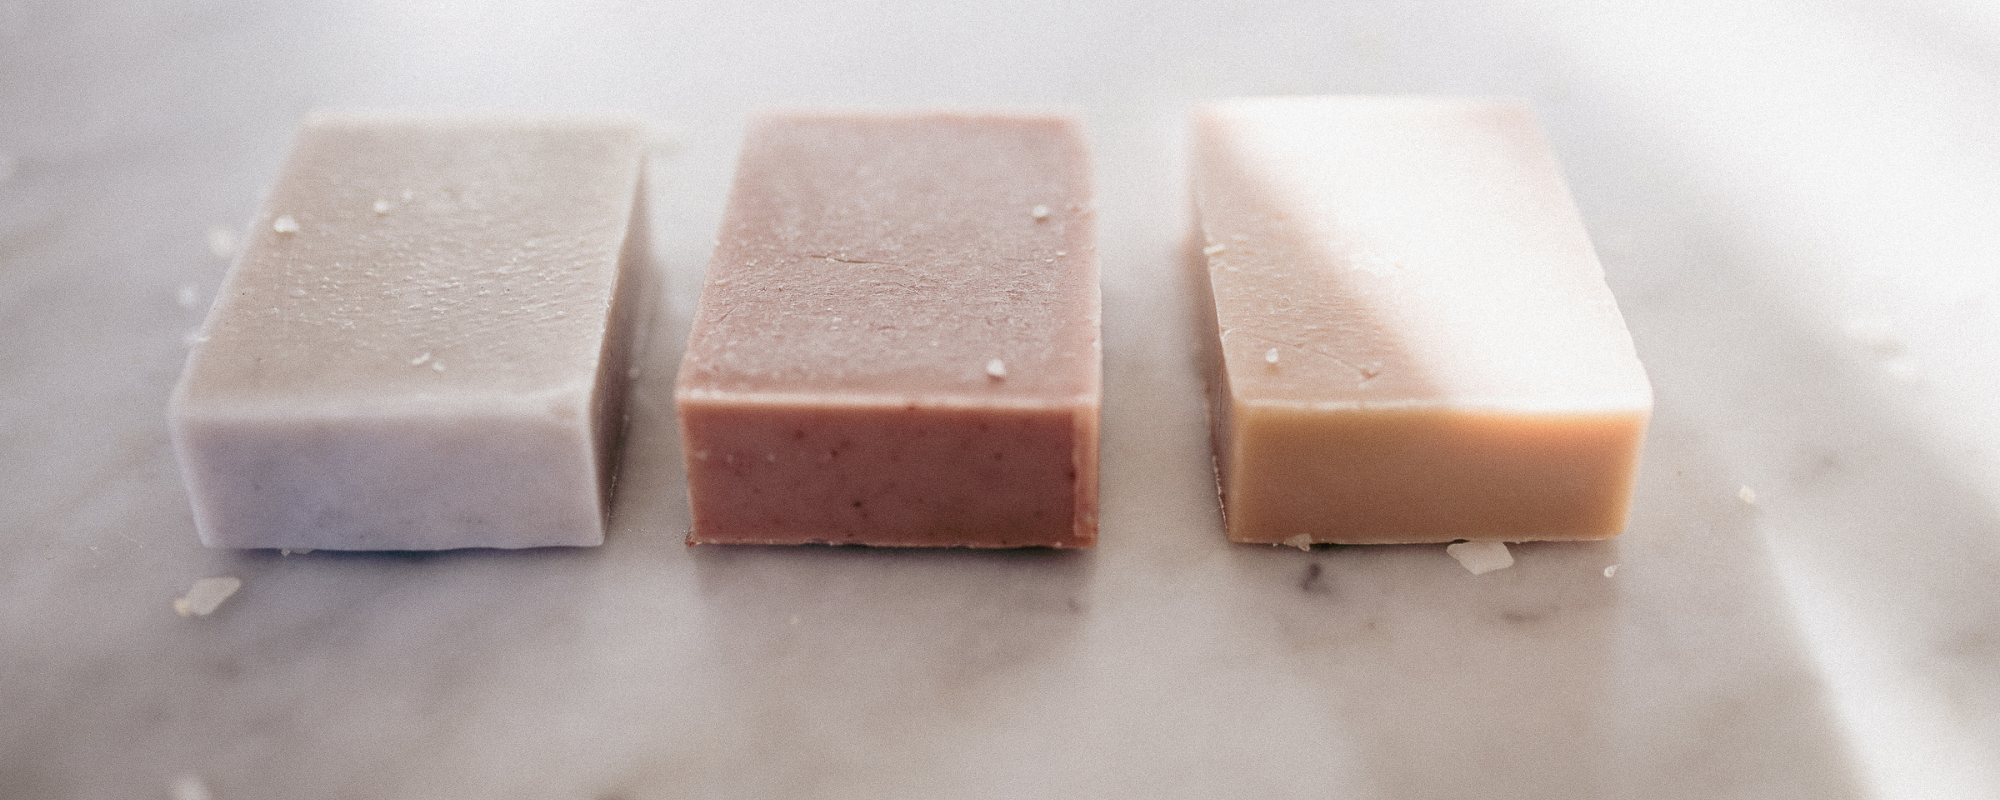 Why Soap Bars?